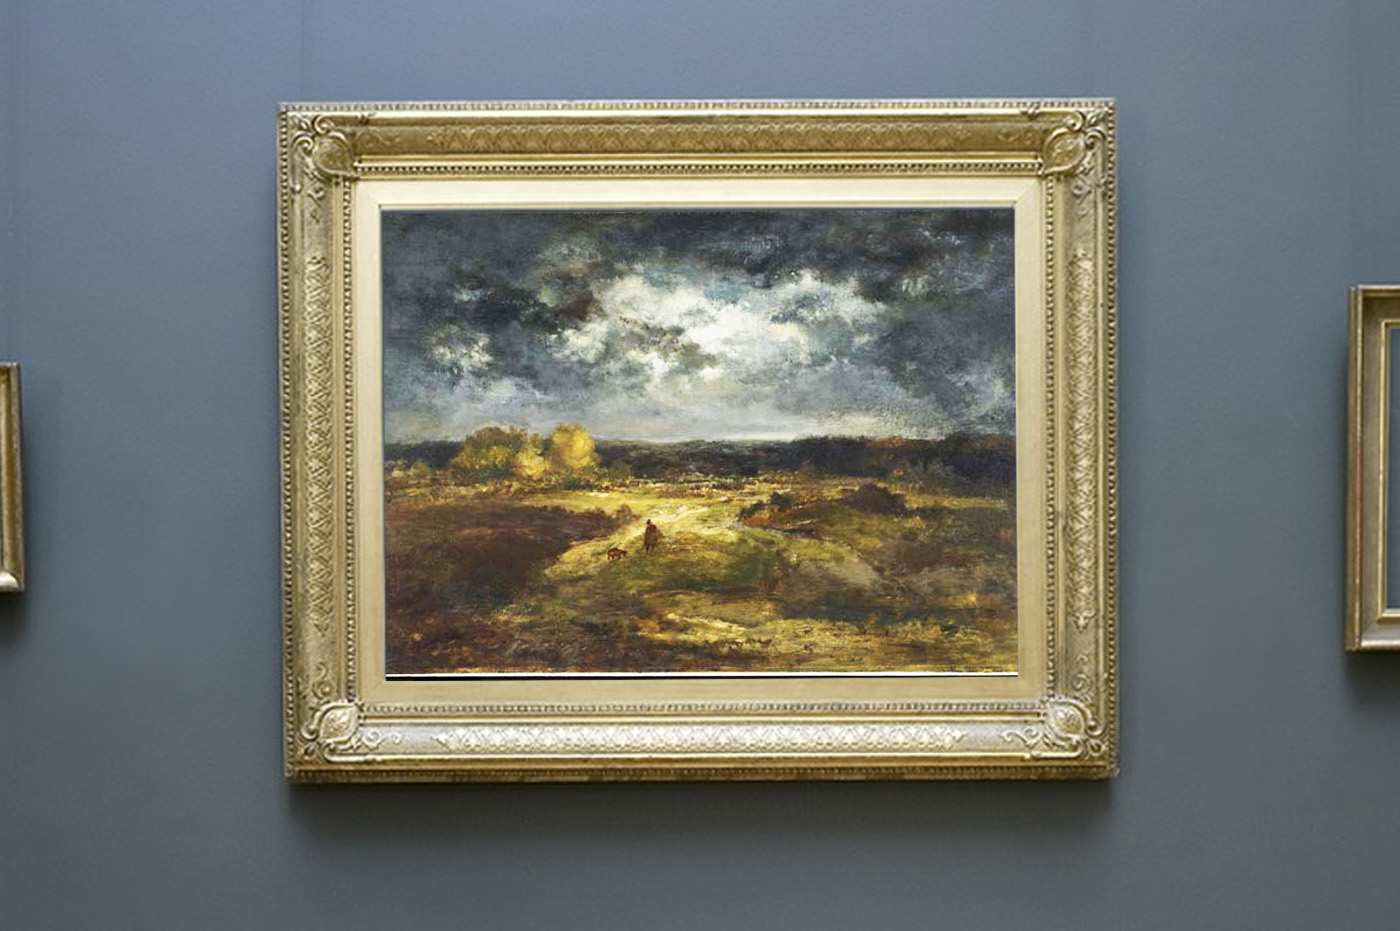 a painting of a a man and a small animal in a damp meadow with a storm in the background